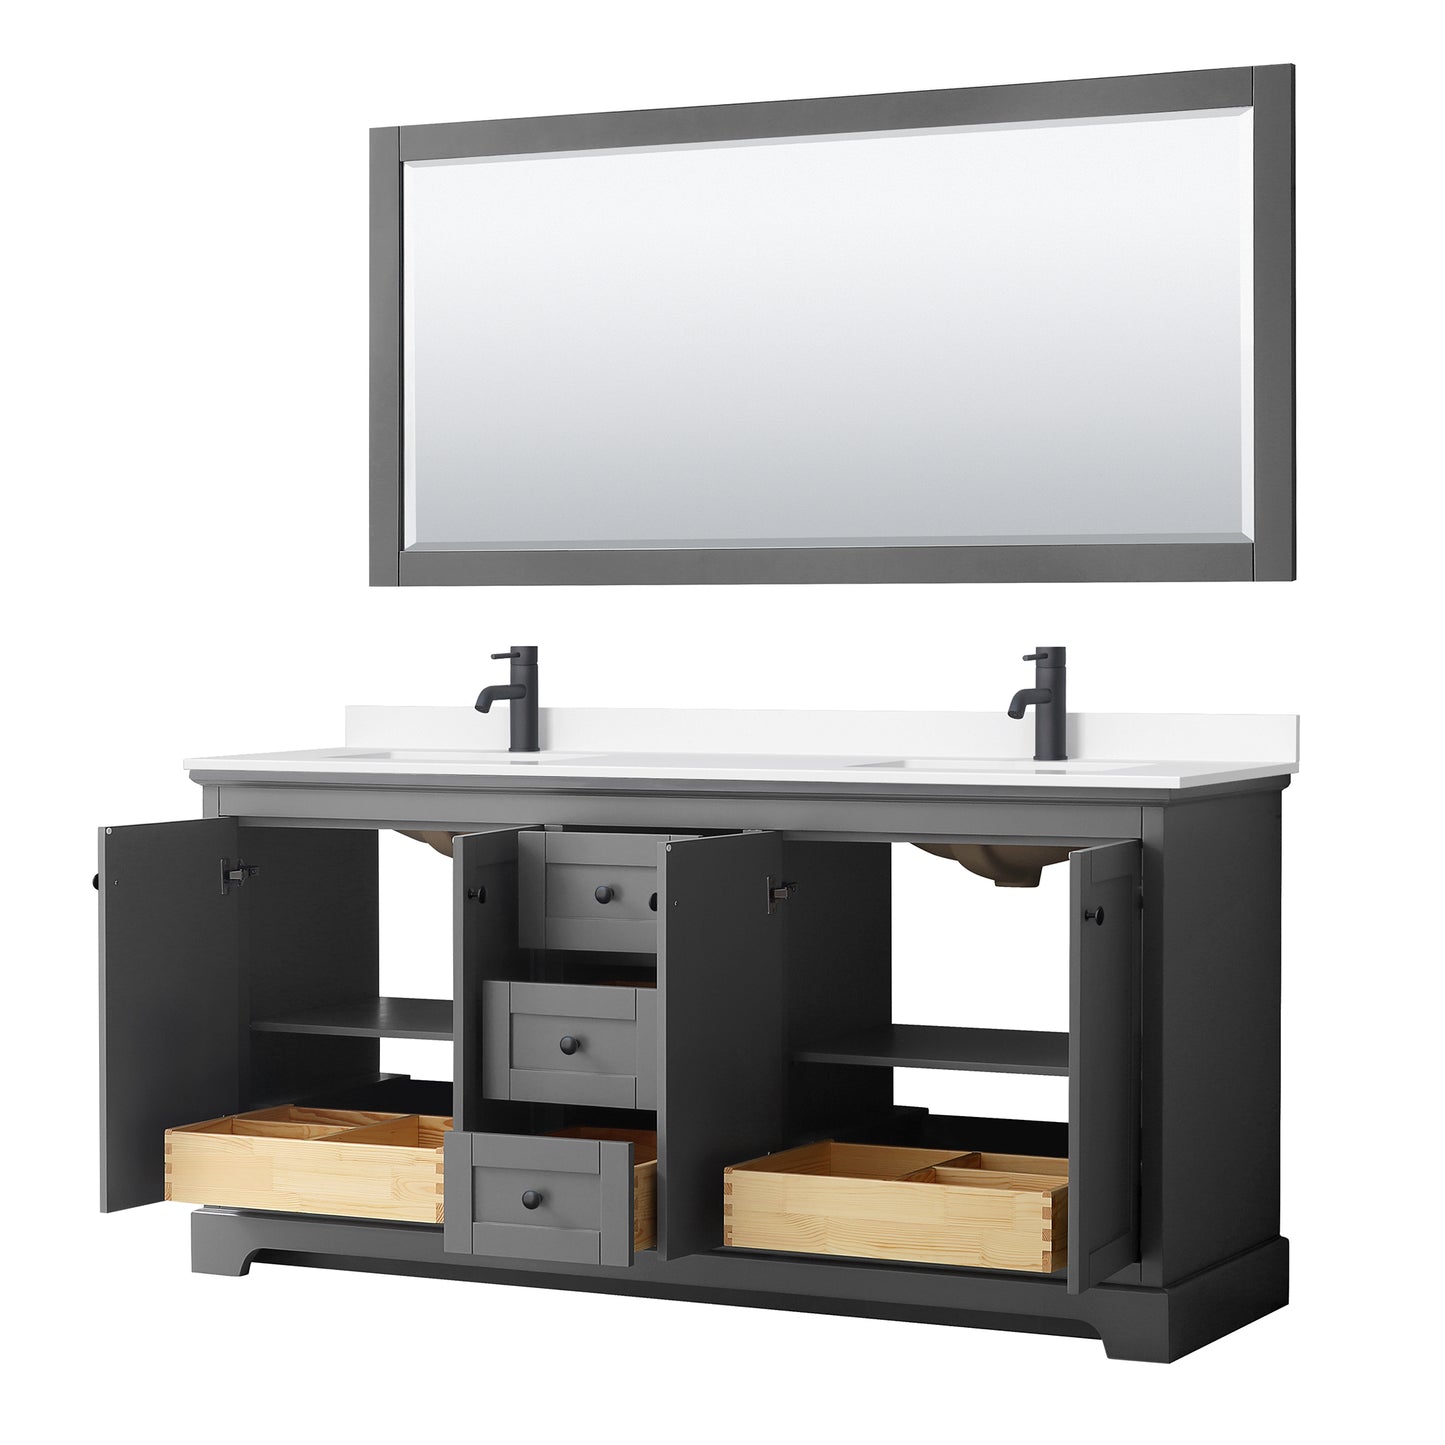 Wyndham Avery 72 Inch Double Bathroom Vanity White Cultured Marble Countertop, Undermount Square Sinks in Matte Black Trim with 70 Inch Mirror - Luxe Bathroom Vanities